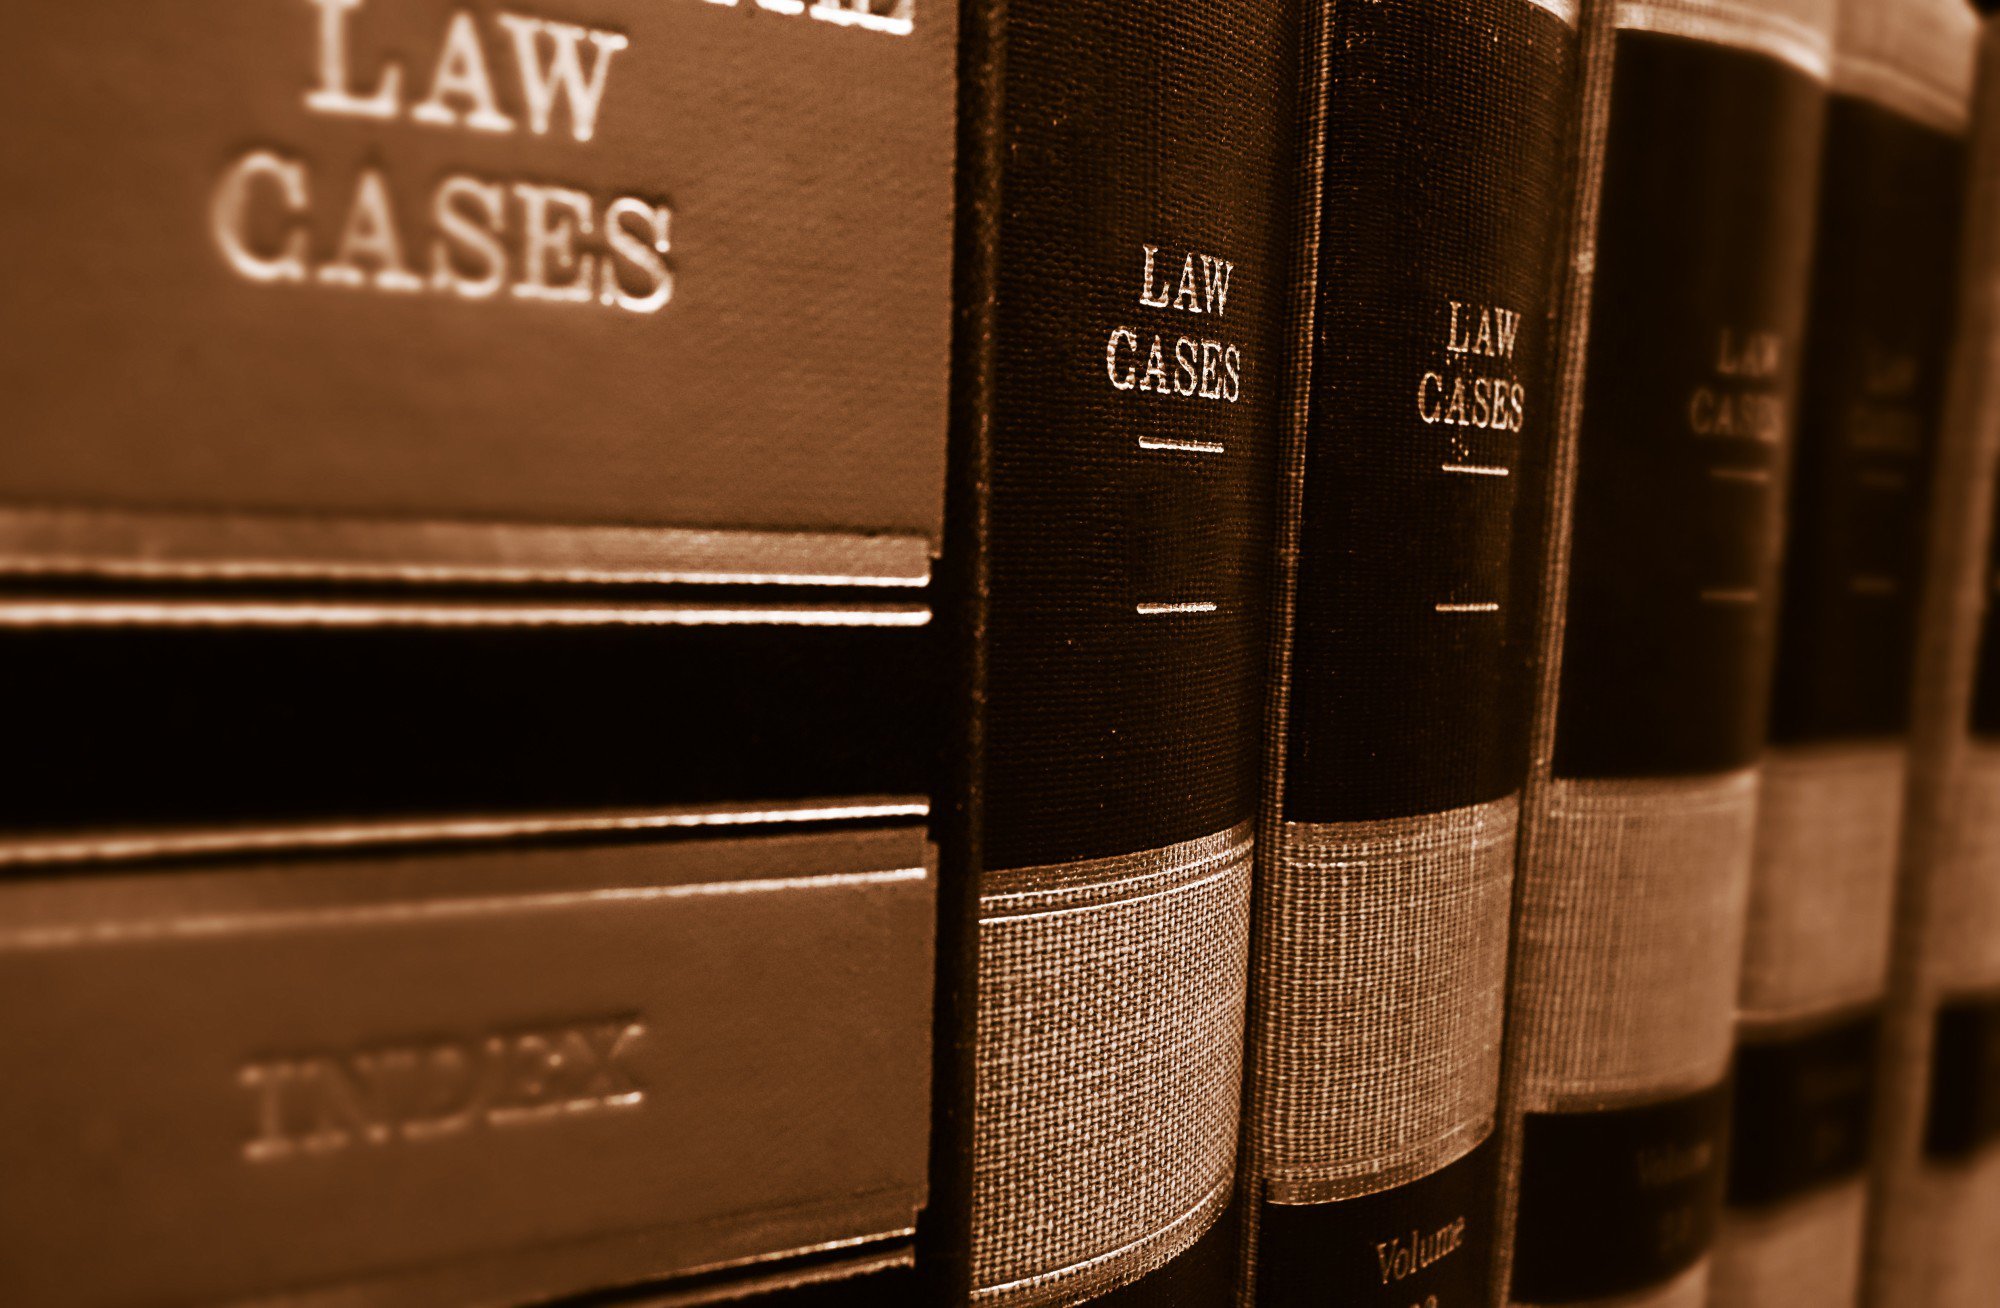 hiring a personal injury attorney